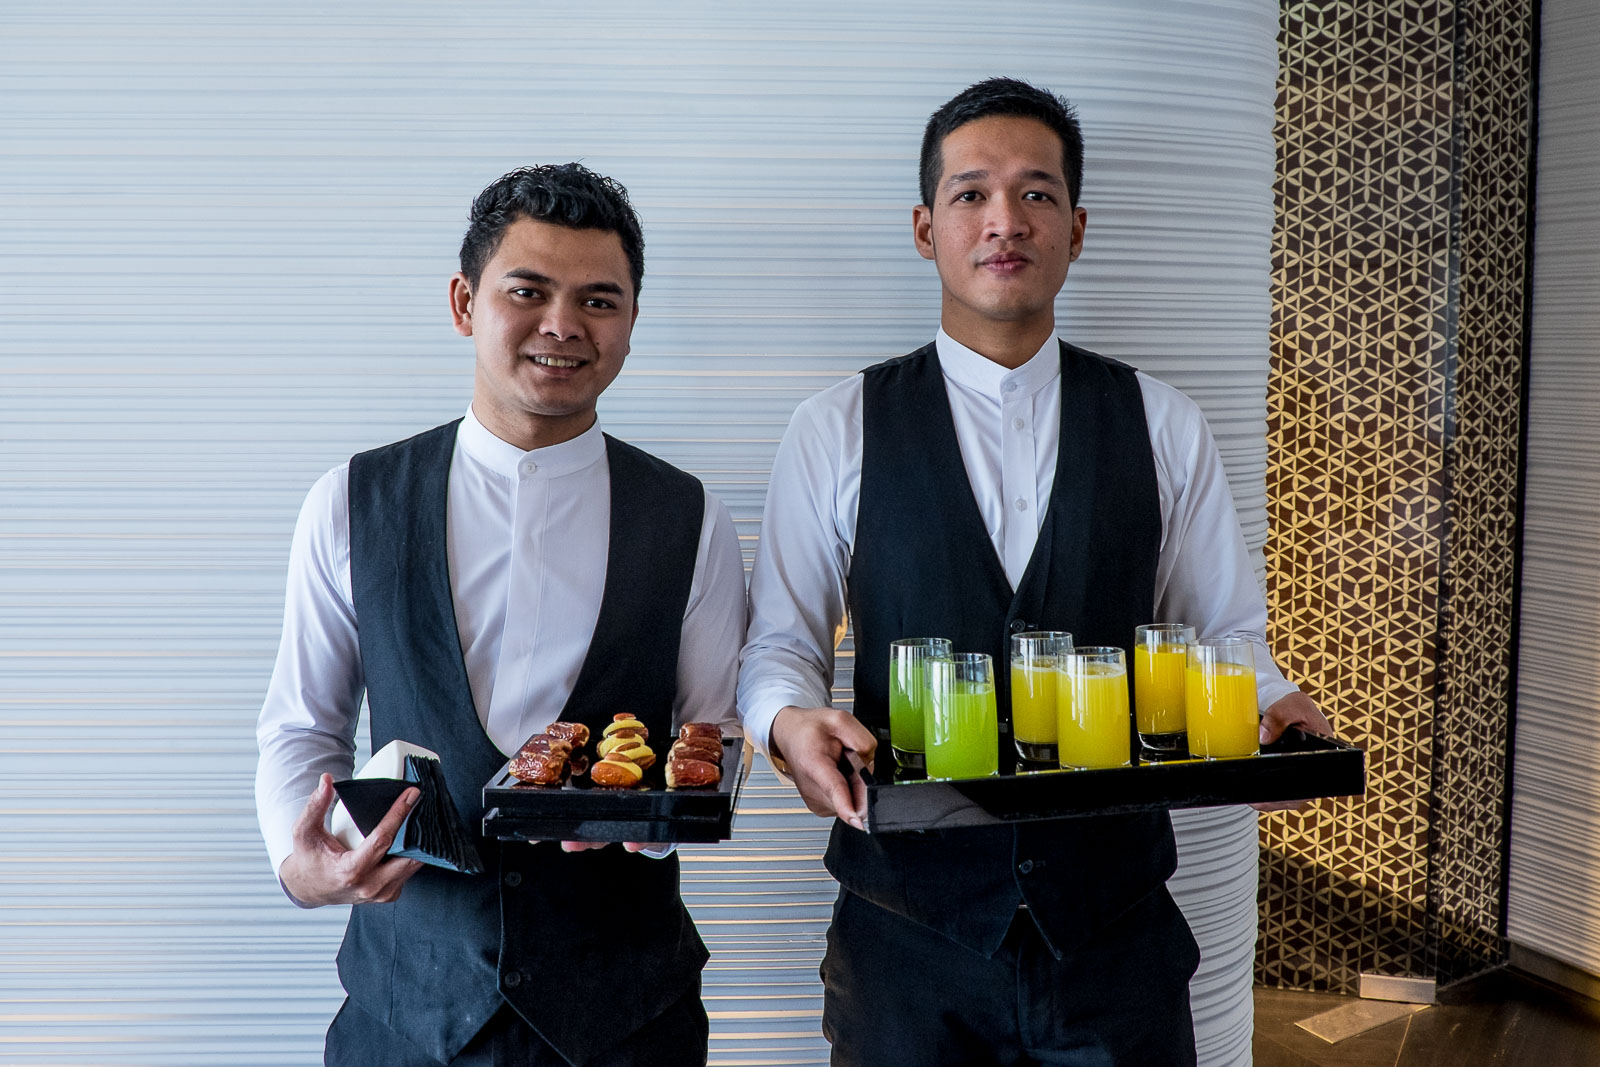 Burj Khalifa - At The Top you get served fresh juices